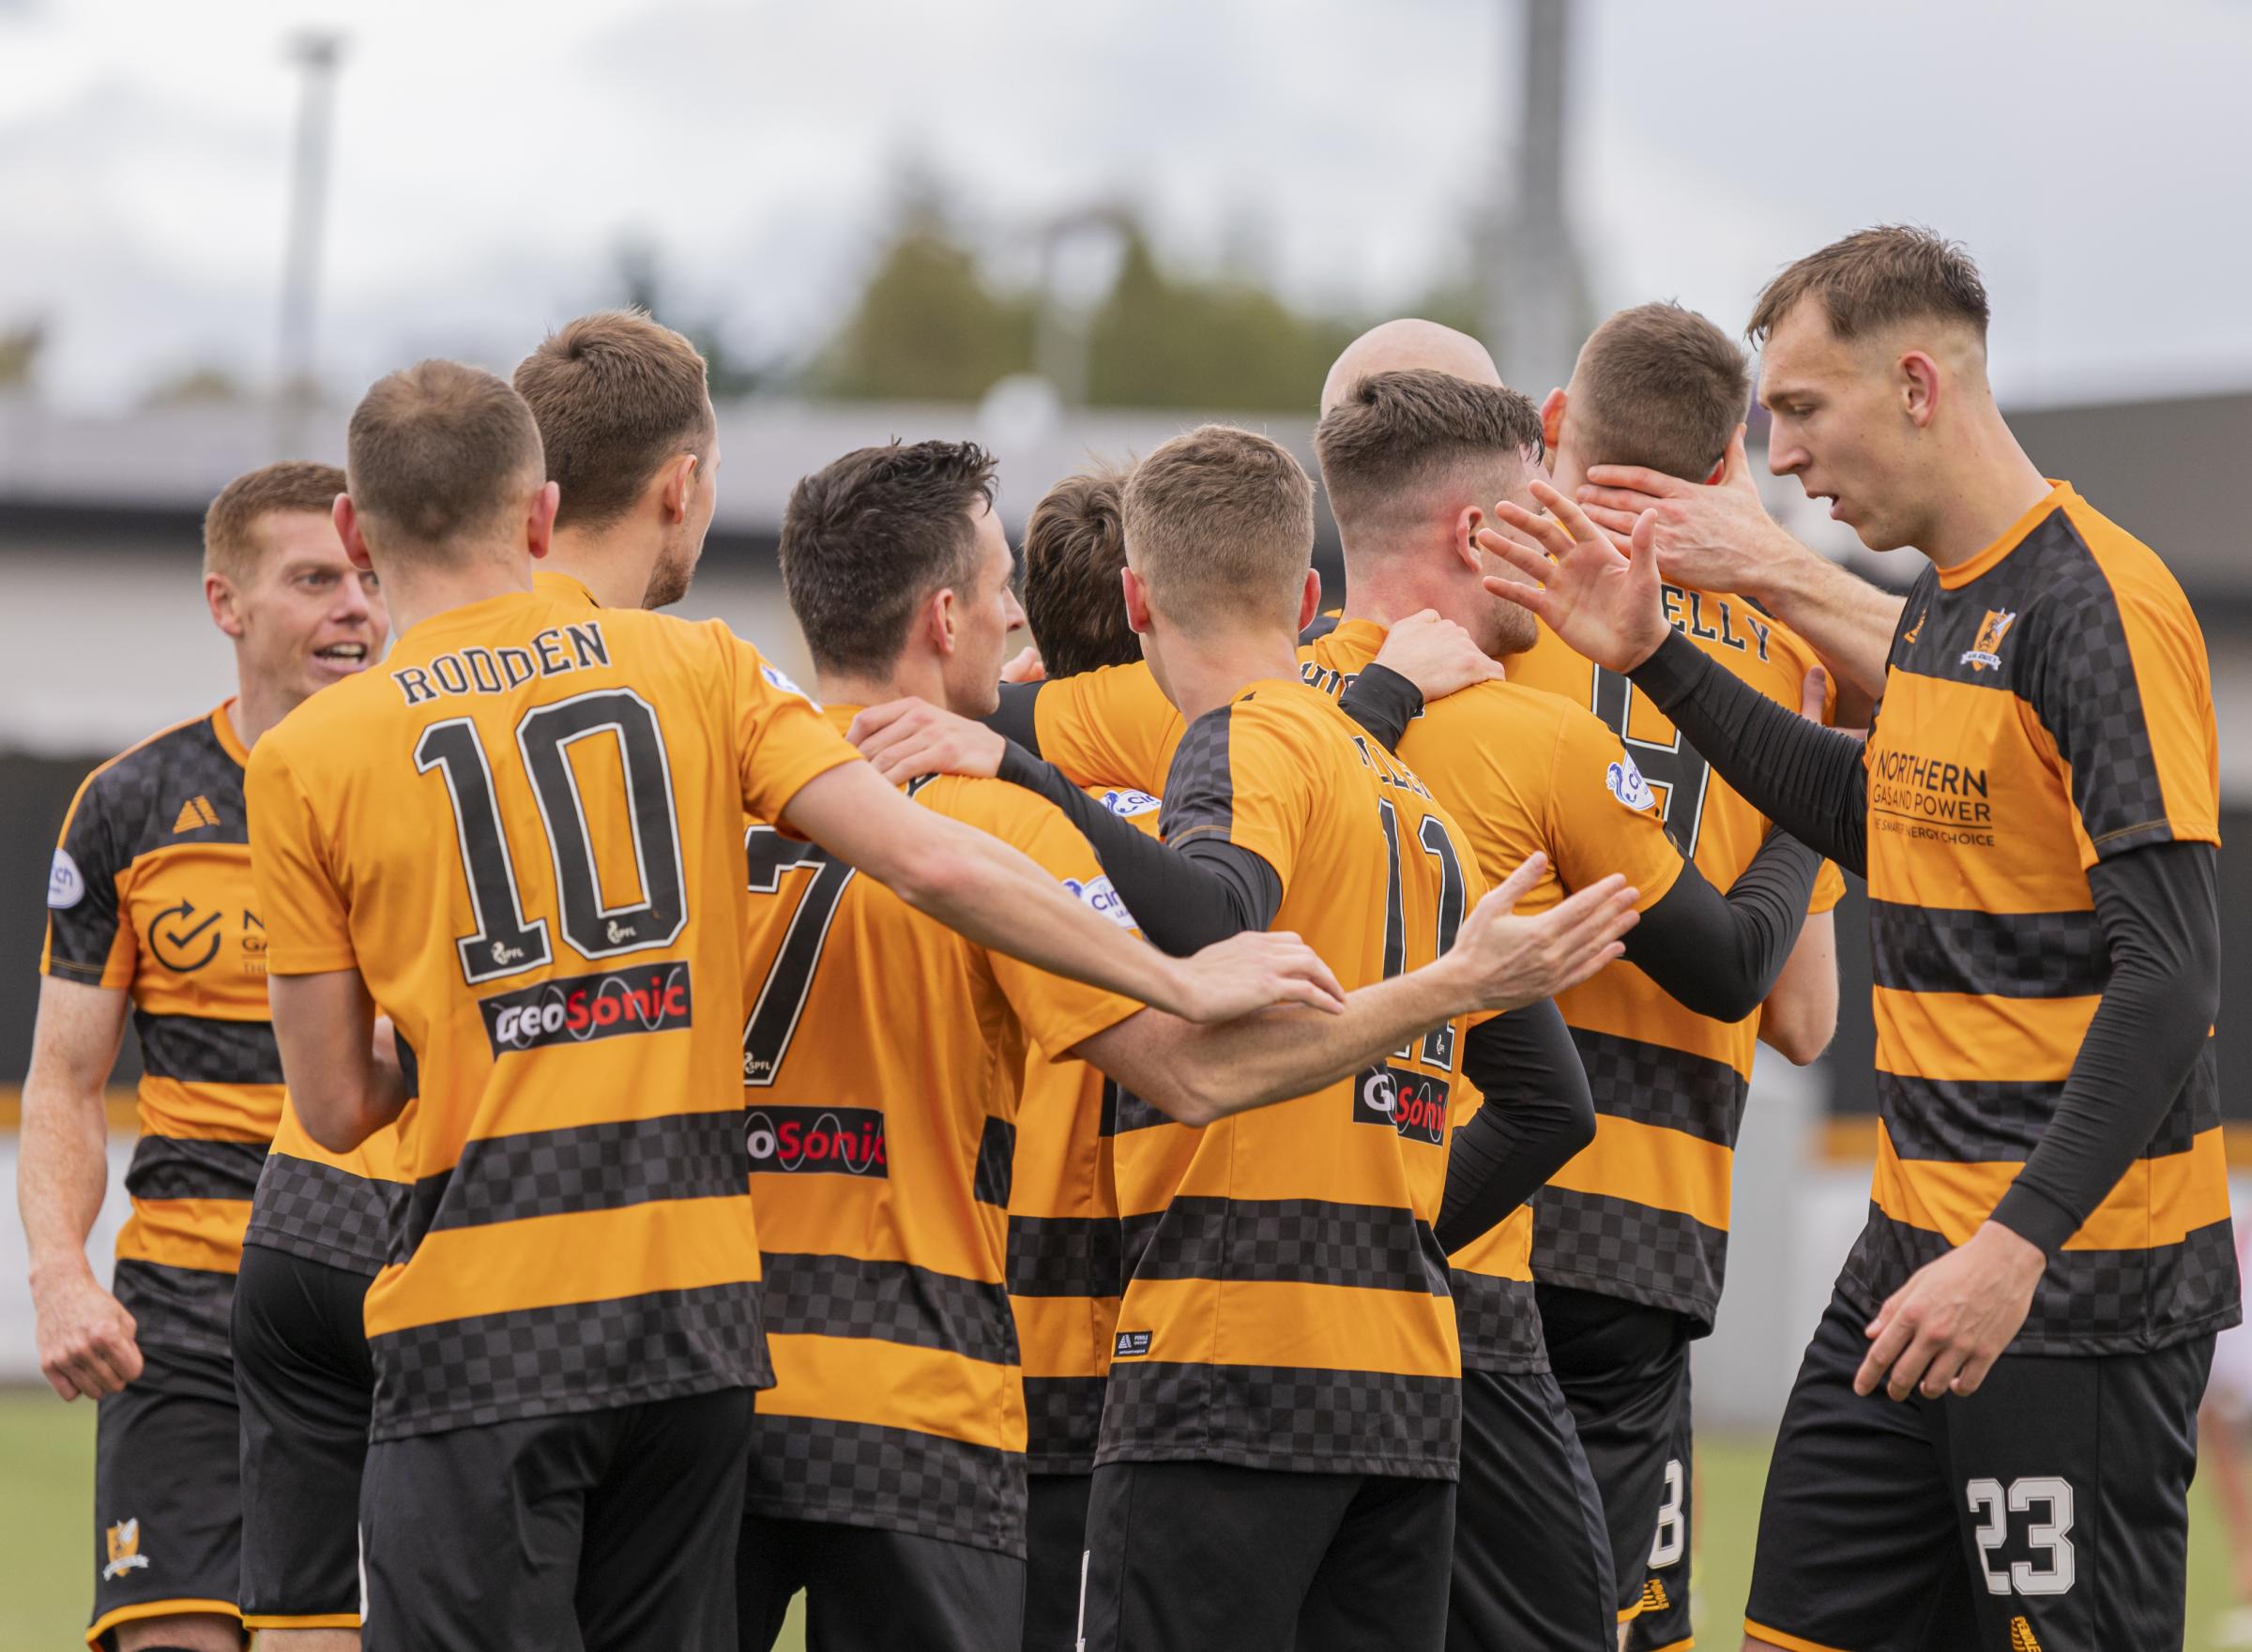 Alloa 2-0 Airdrieonians: Strong performance secures victory for Wasps